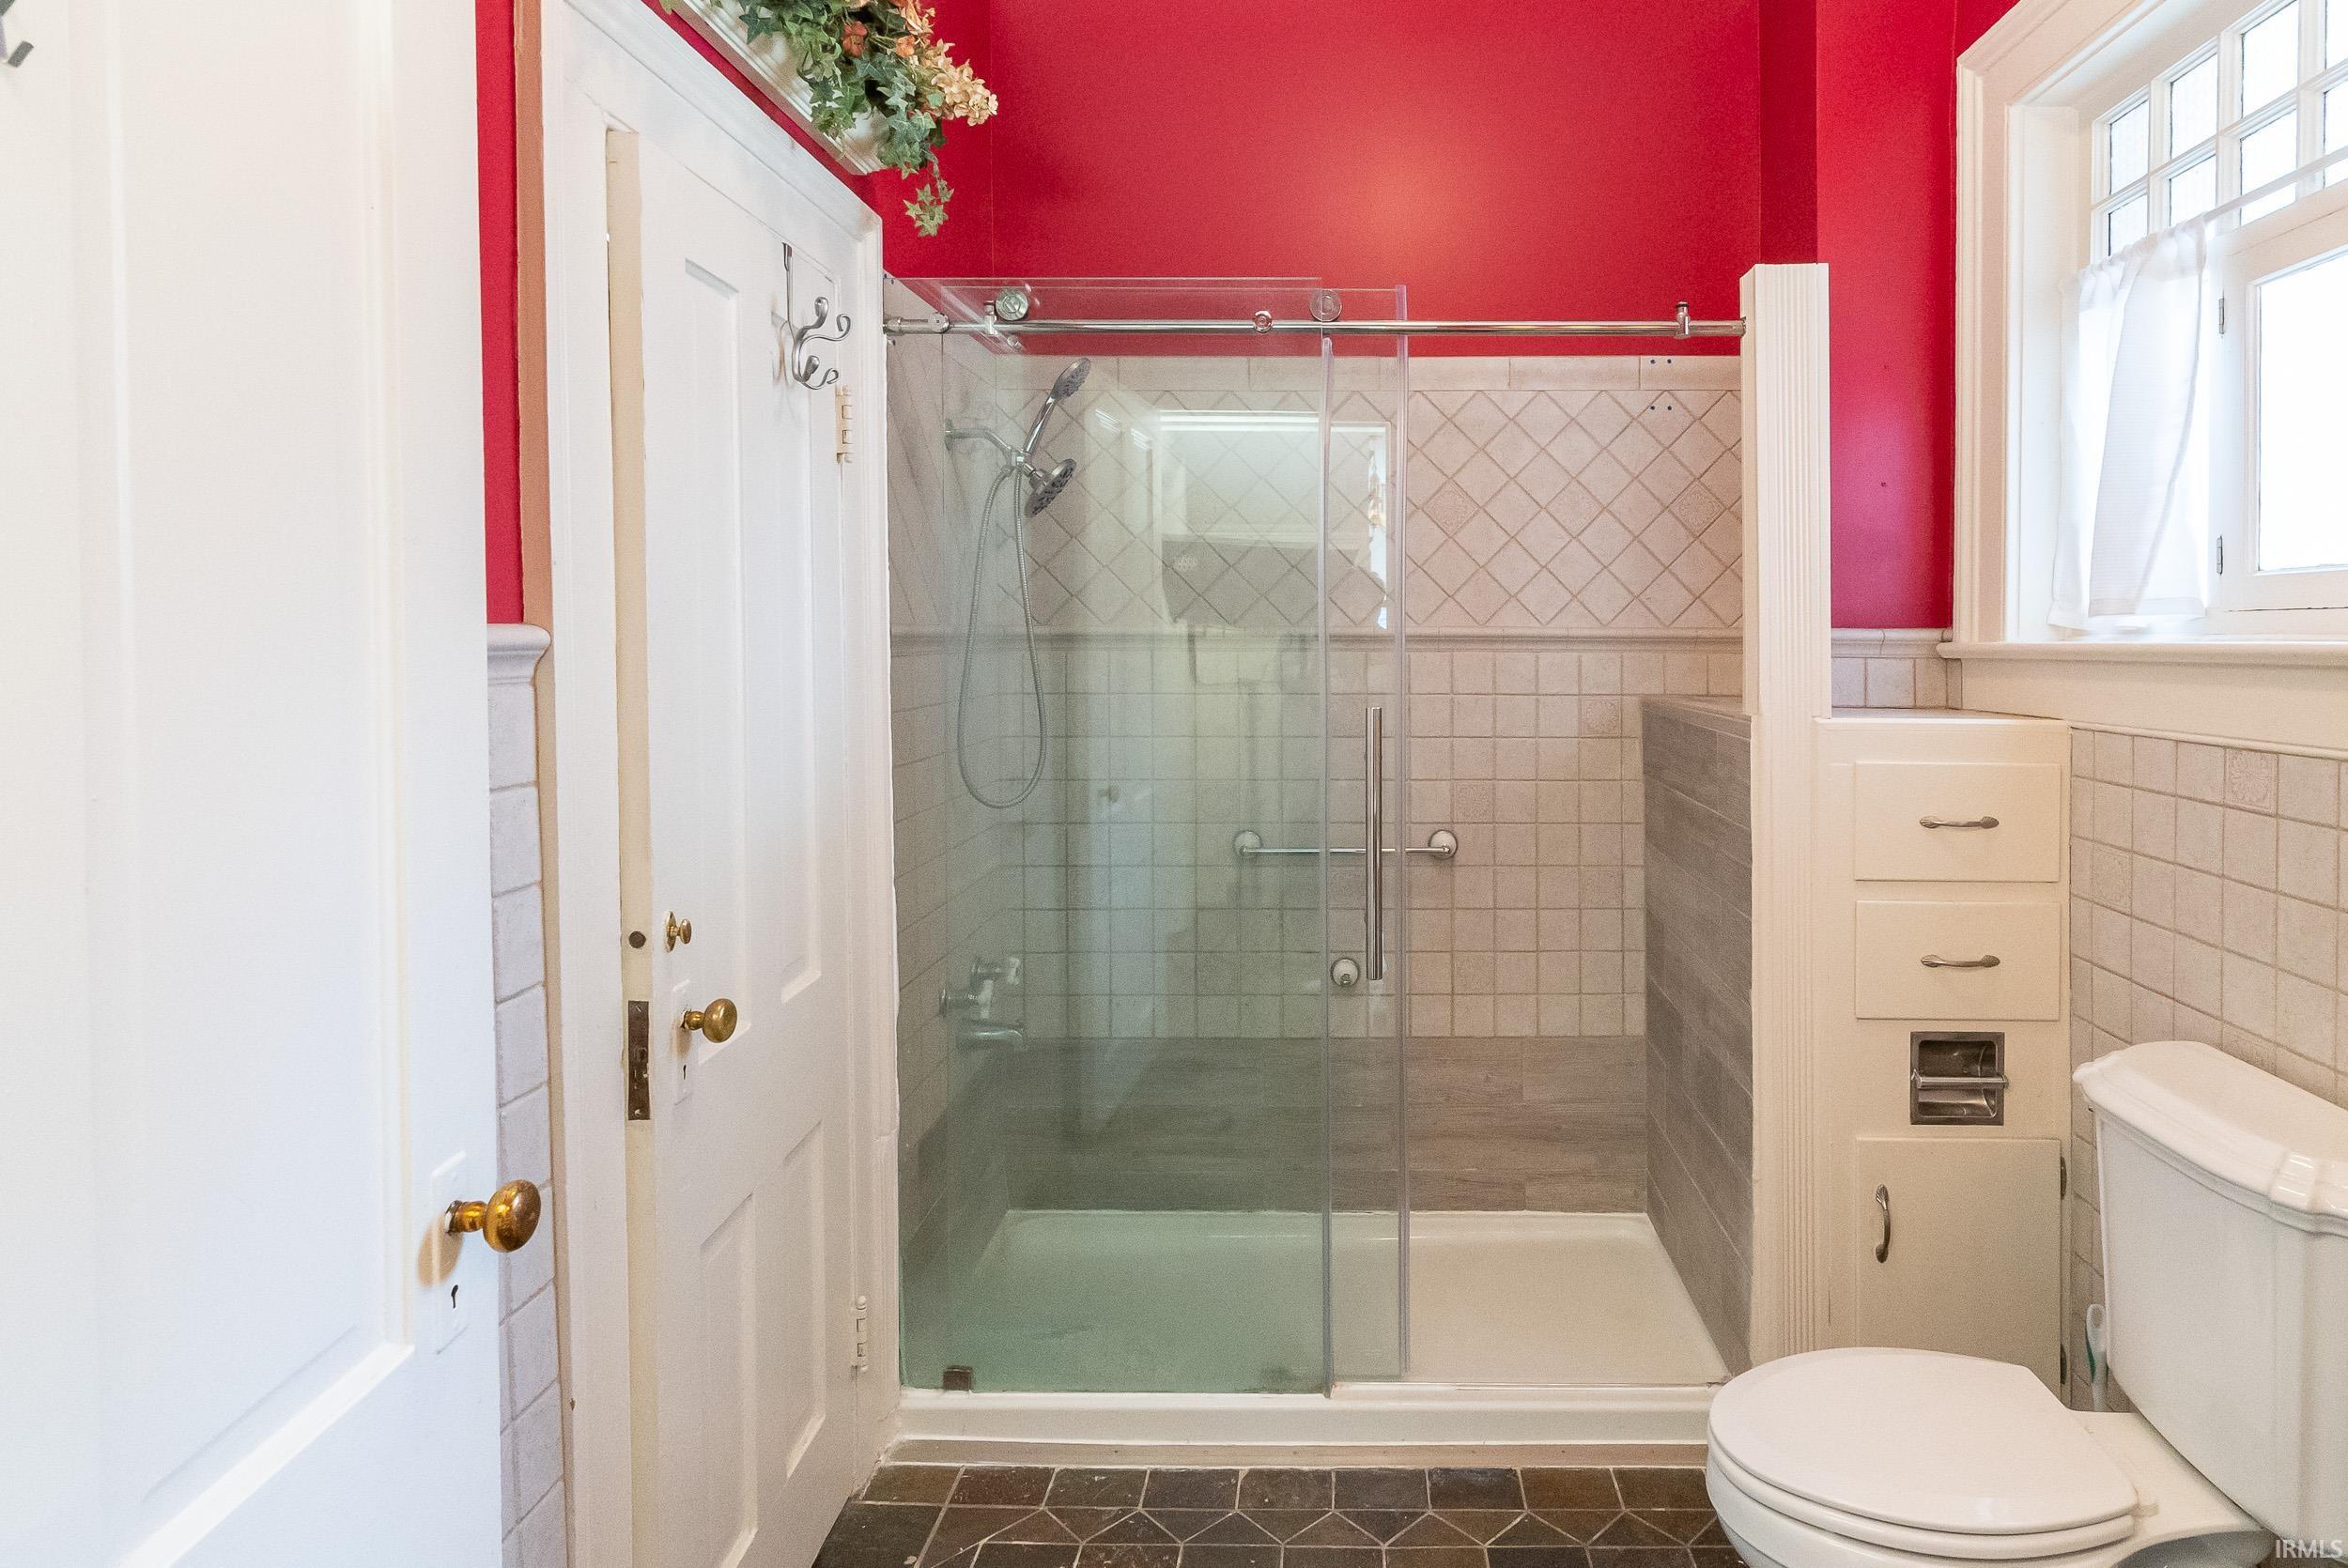 This bath room is connected to Bedroom #2 on the main floor. House has 2 water heaters so that hot water is always available even while doing laundry.